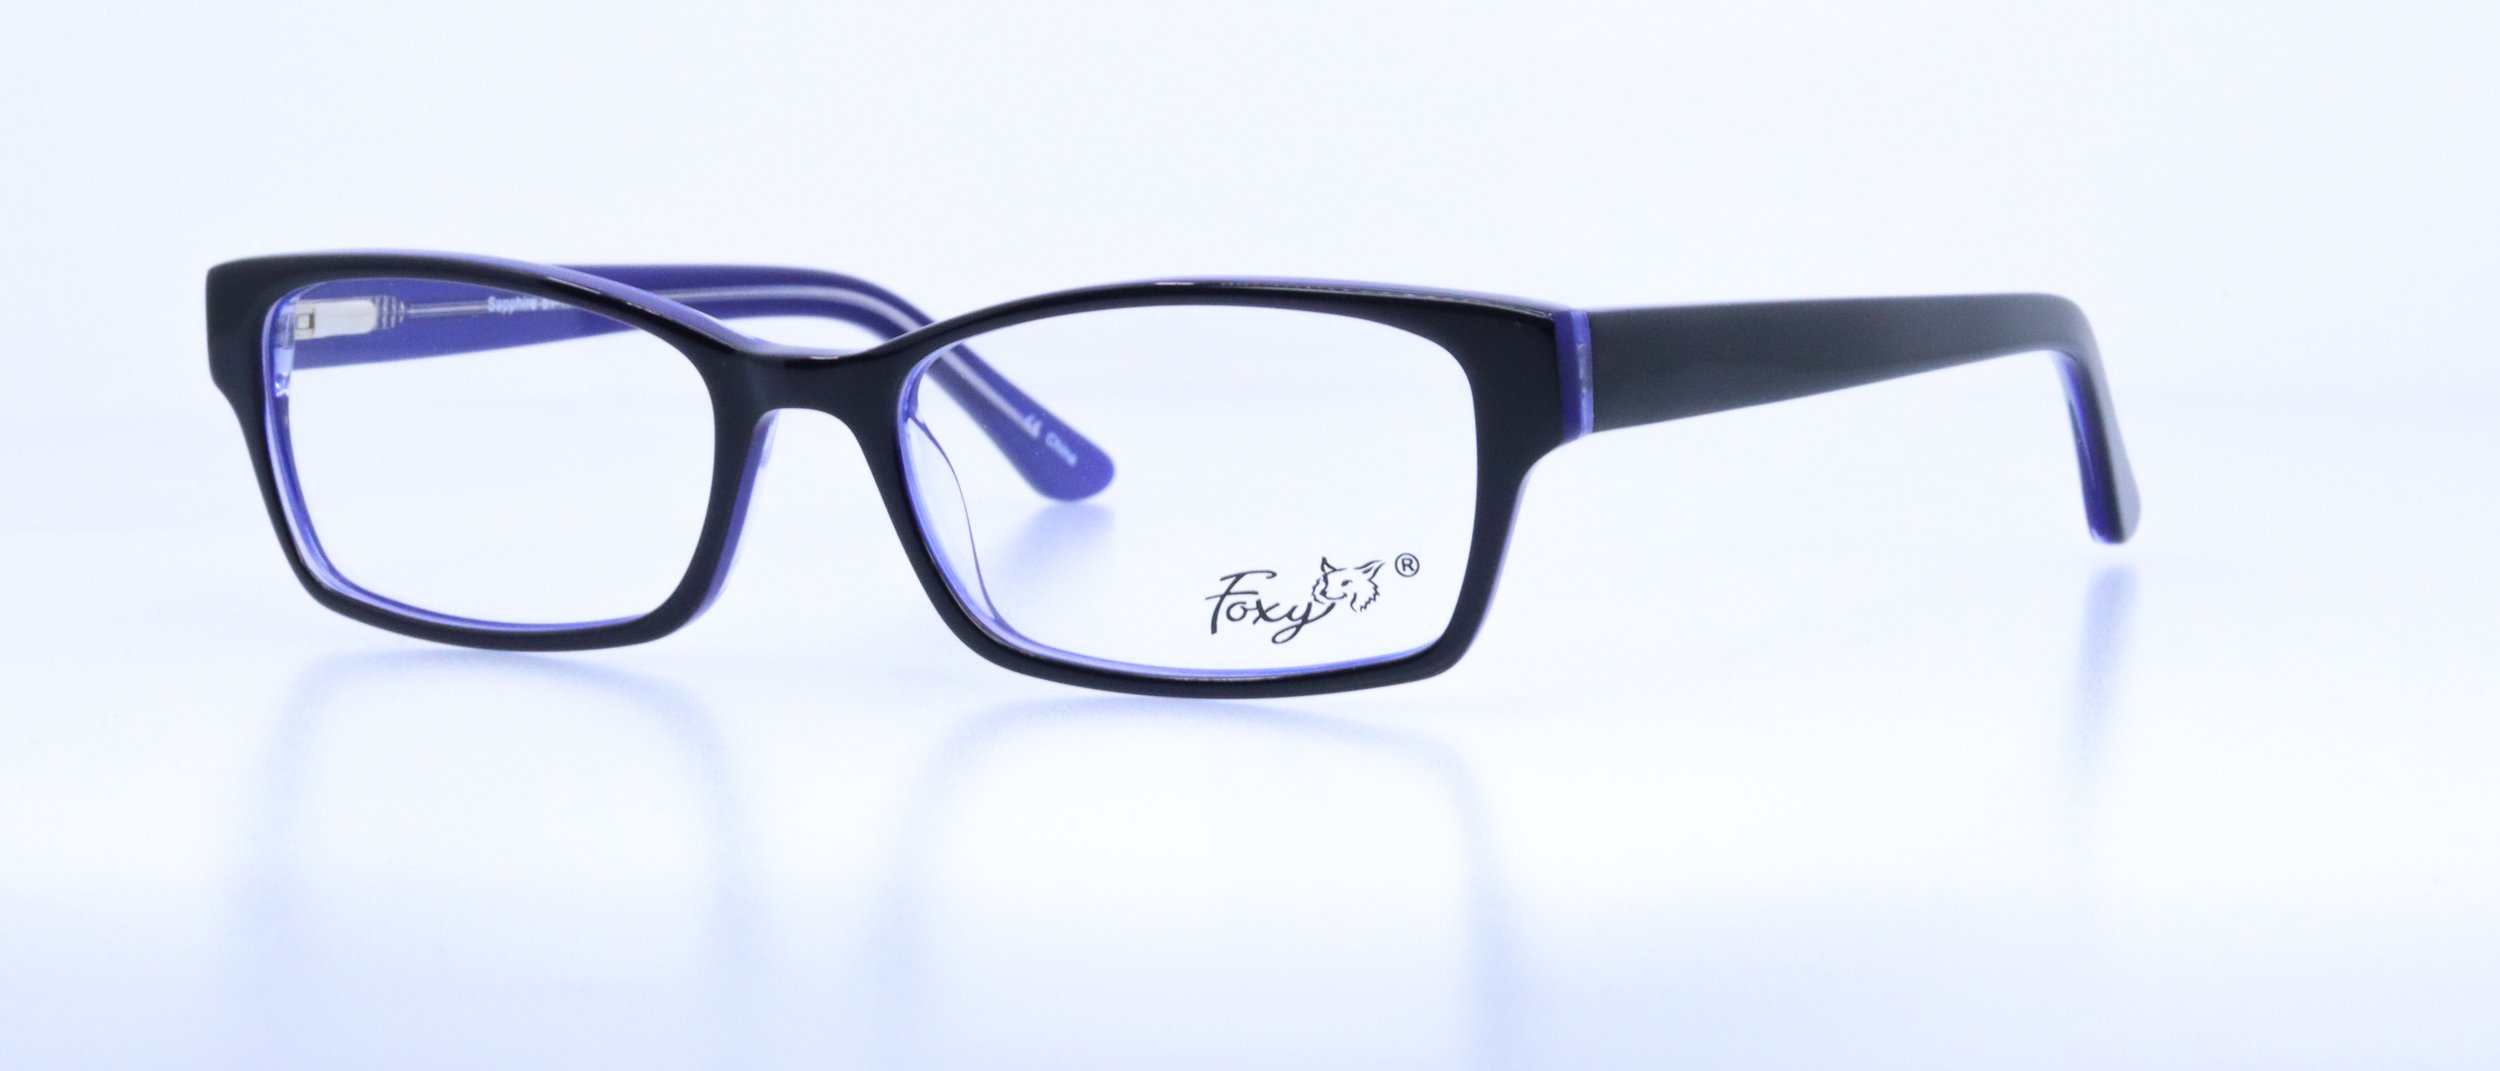  Flirty: 51-17-135, Available in Chestnut, Sapphire, or Tortoise/Purple (Formerly Bounce) 